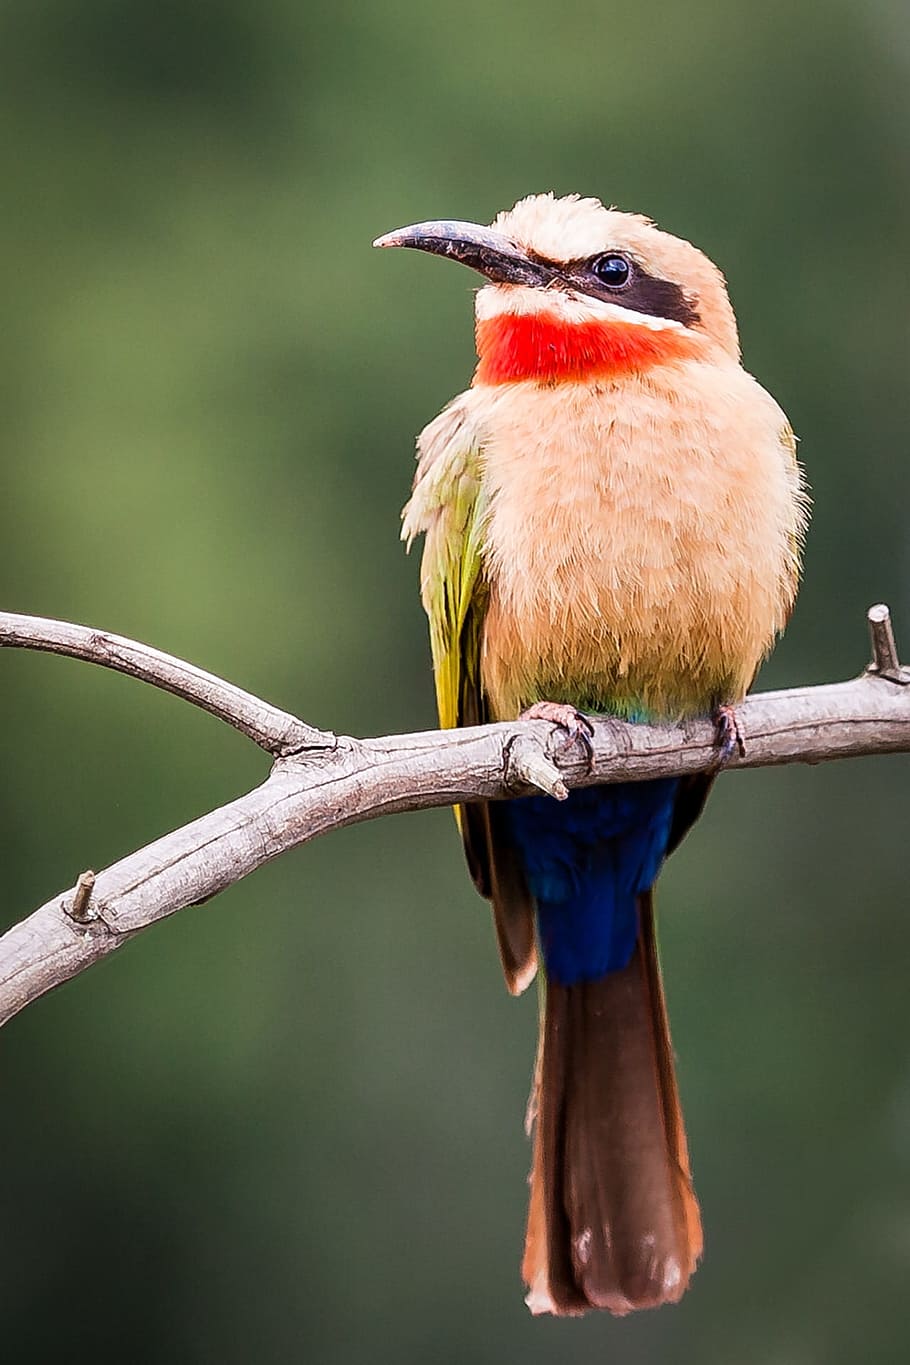 white-fronted bee-eater, eye, looking, portrait, perched, branch, wildlife, bird, nature, animal